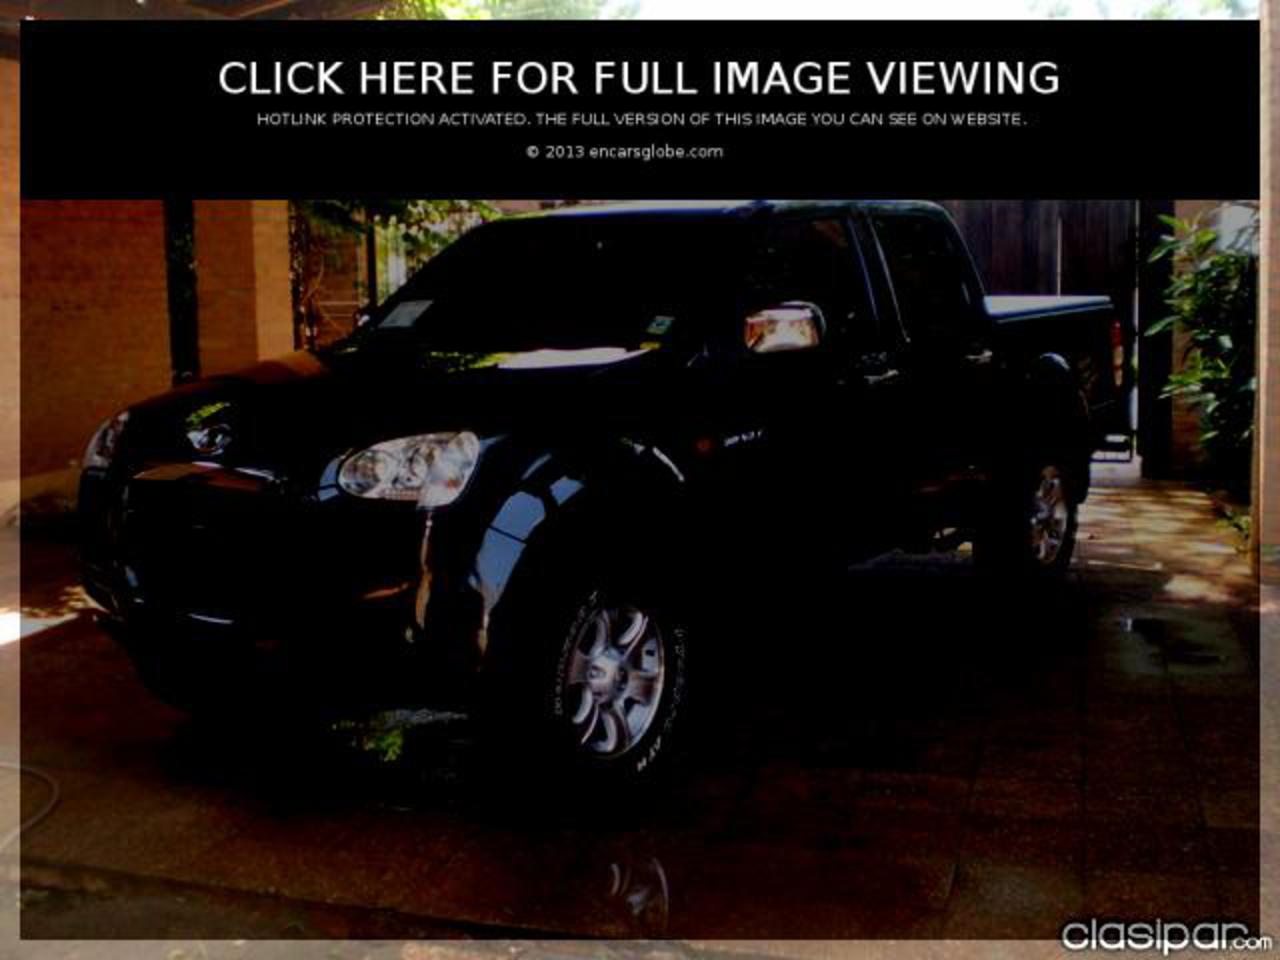 Great Wall Wingle 4x4 Photo Gallery: Photo #02 out of 12, Image ...